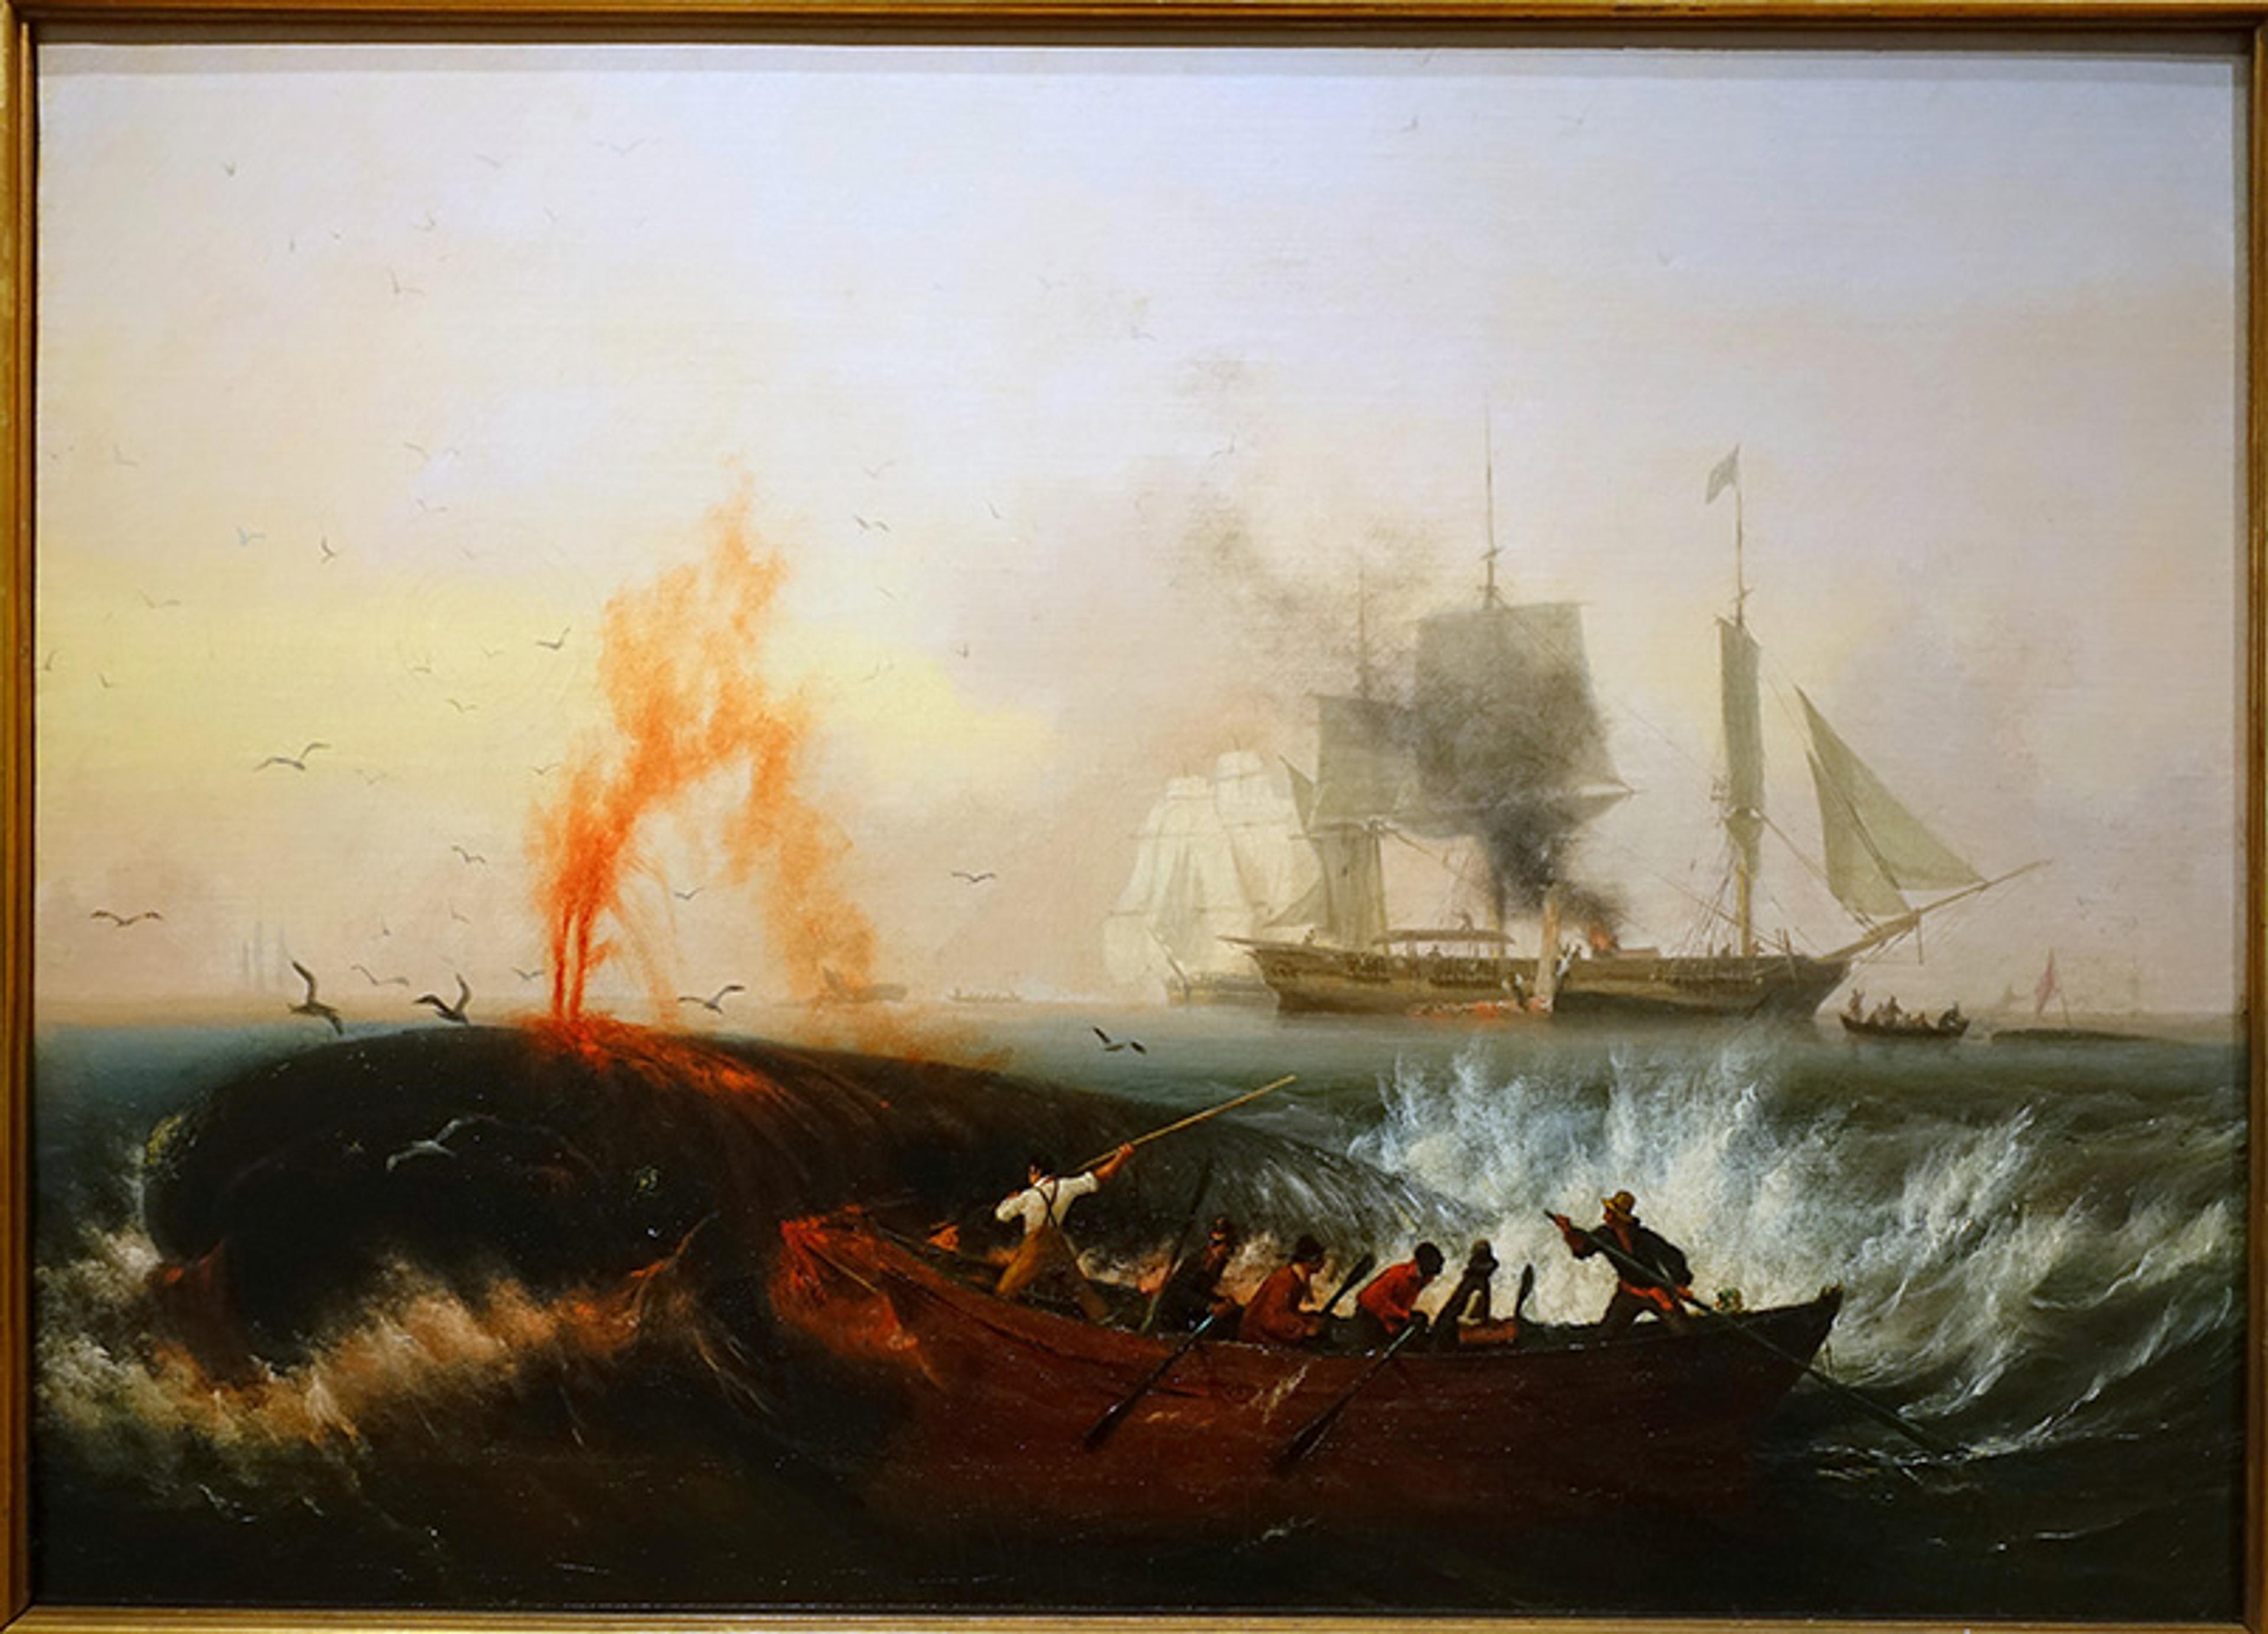 Painting of men in a small boat hunting a whale, with larger ships in the background and waves crashing around them. Sea birds fly overhead.